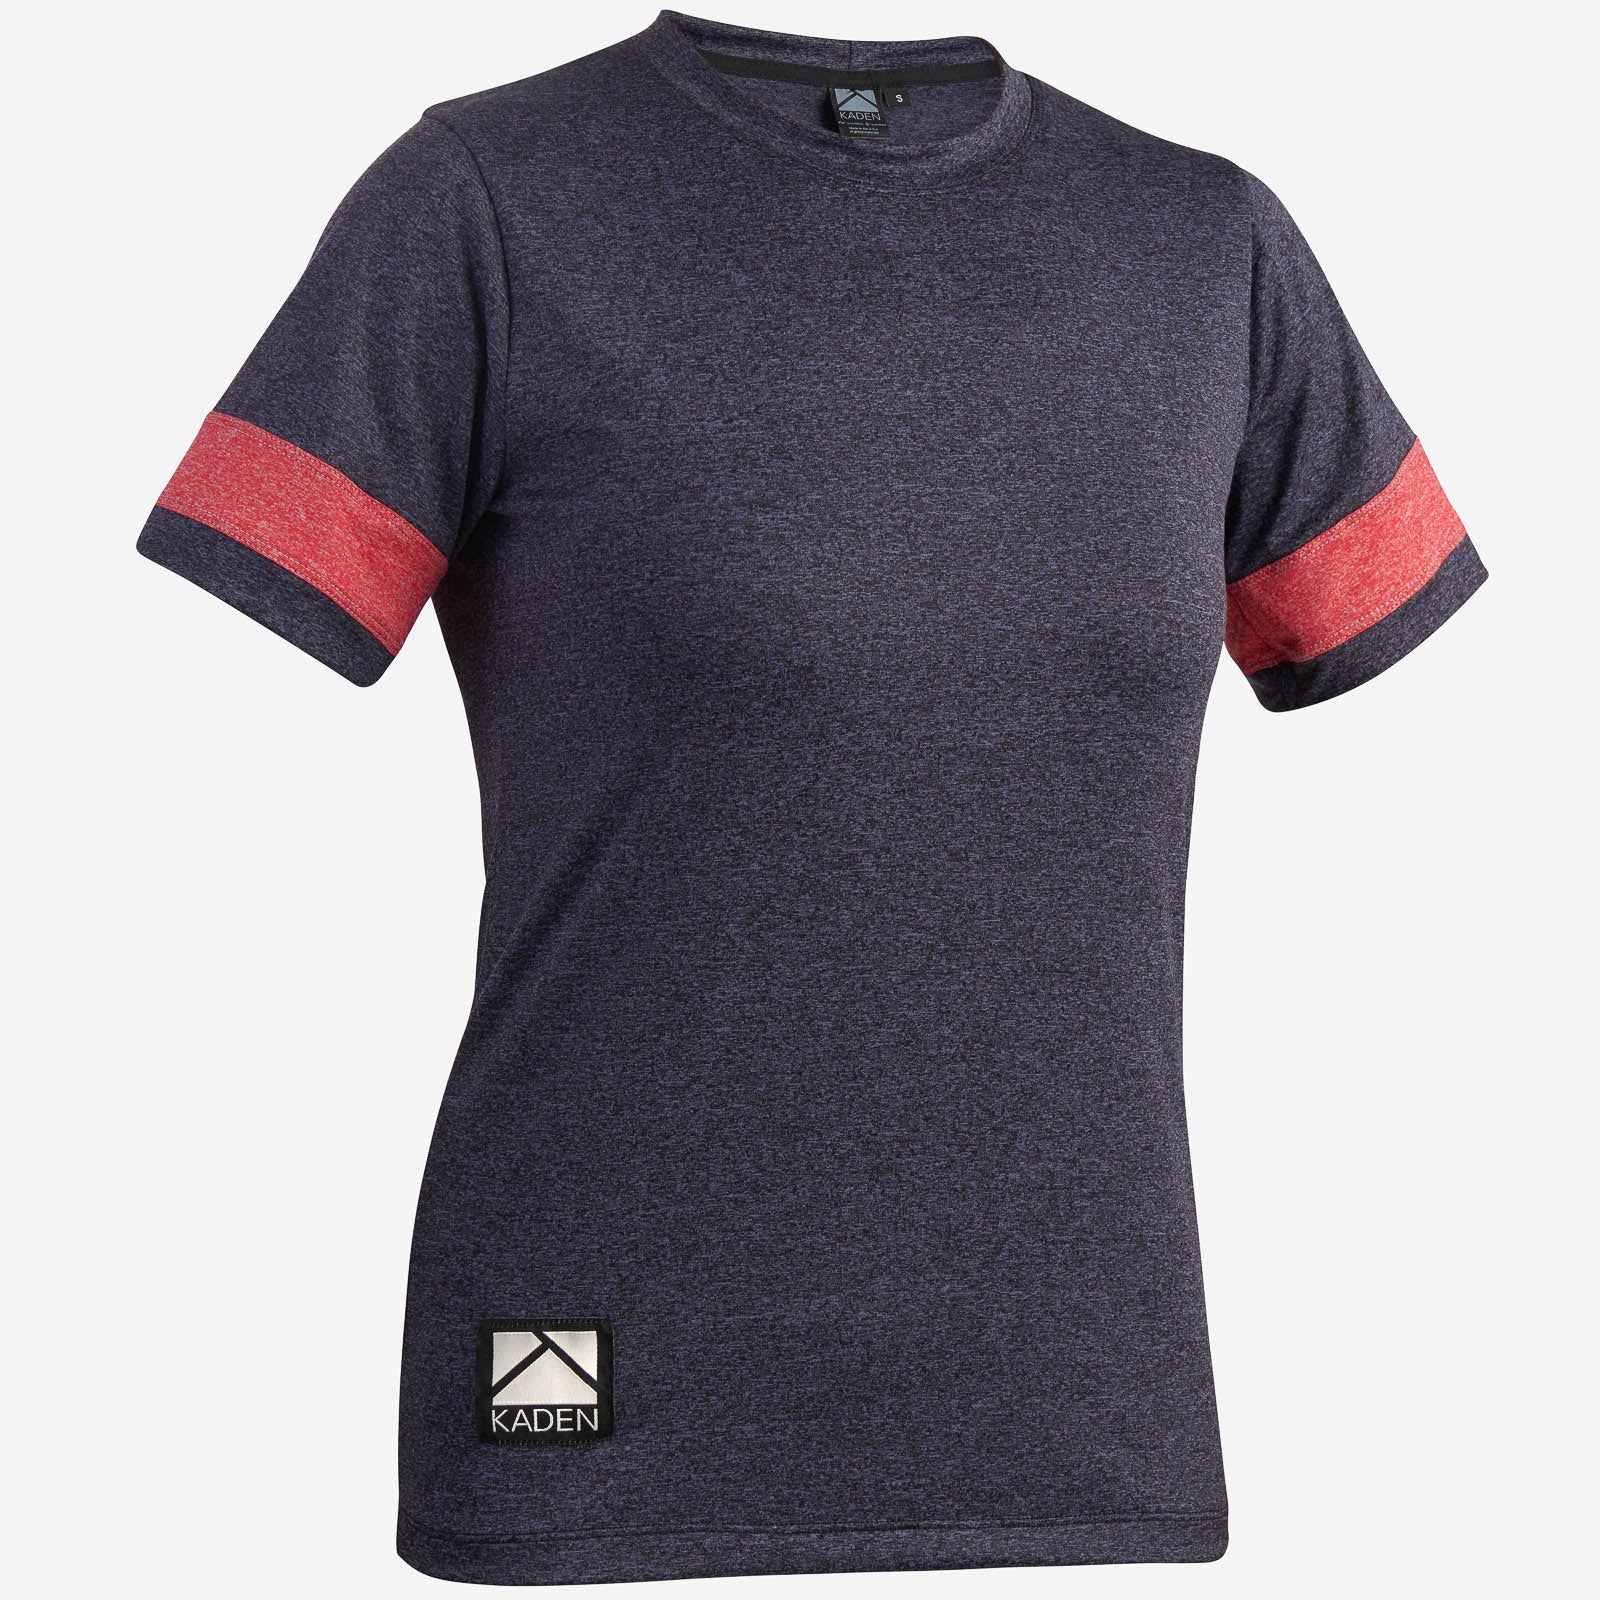 Florence Jersey Reviewed by Grit and Gear - Florence Jersey